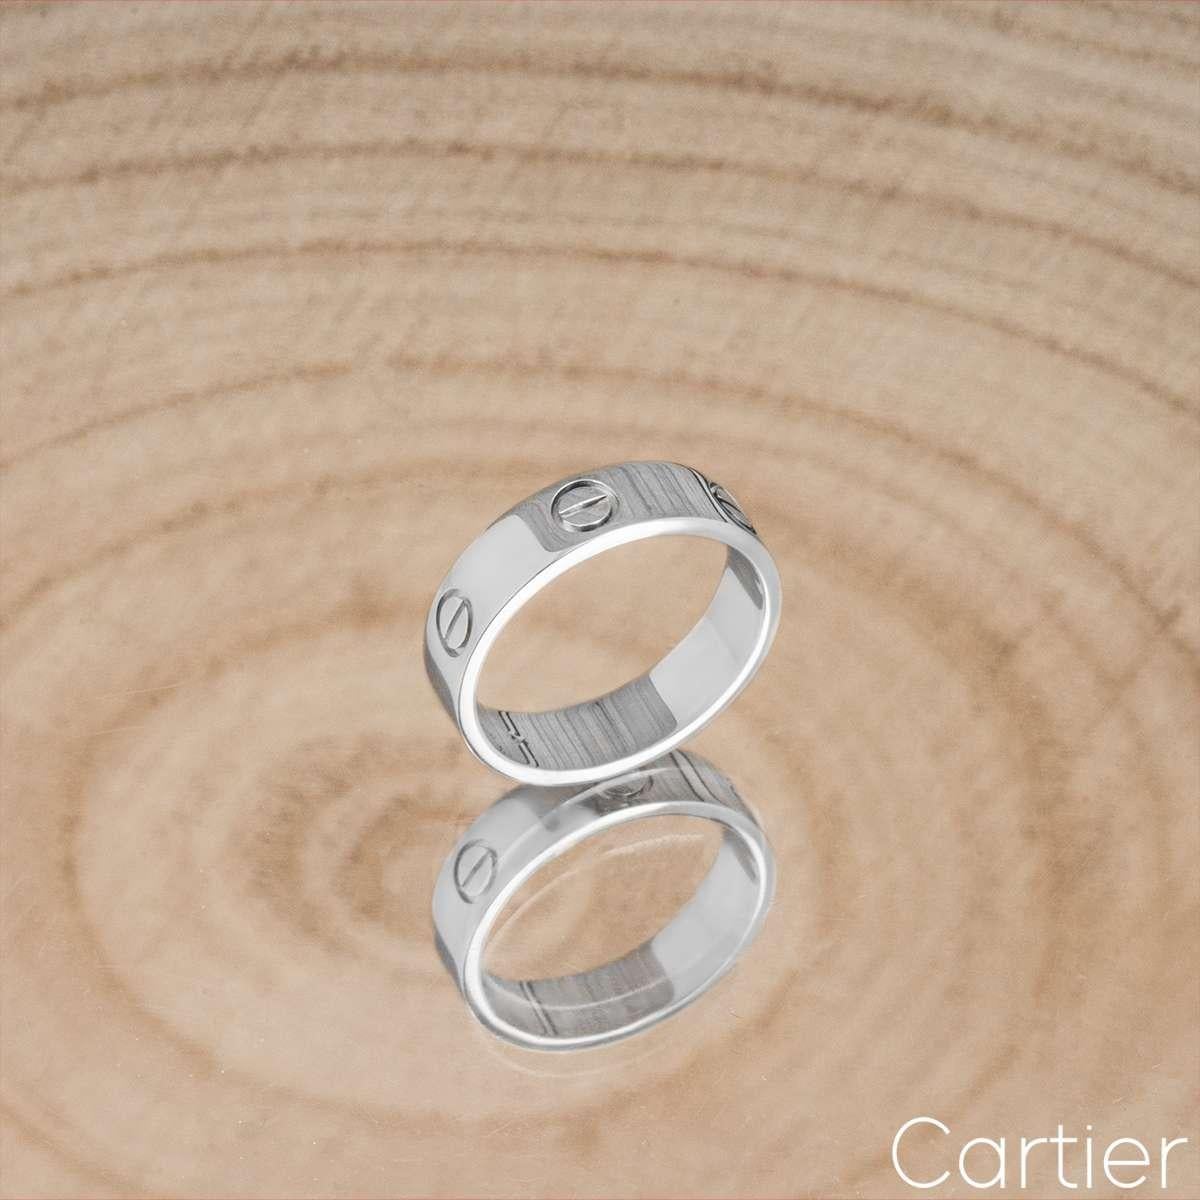 Cartier White Gold Plain Love Ring Size 53 B4084700 For Sale 2